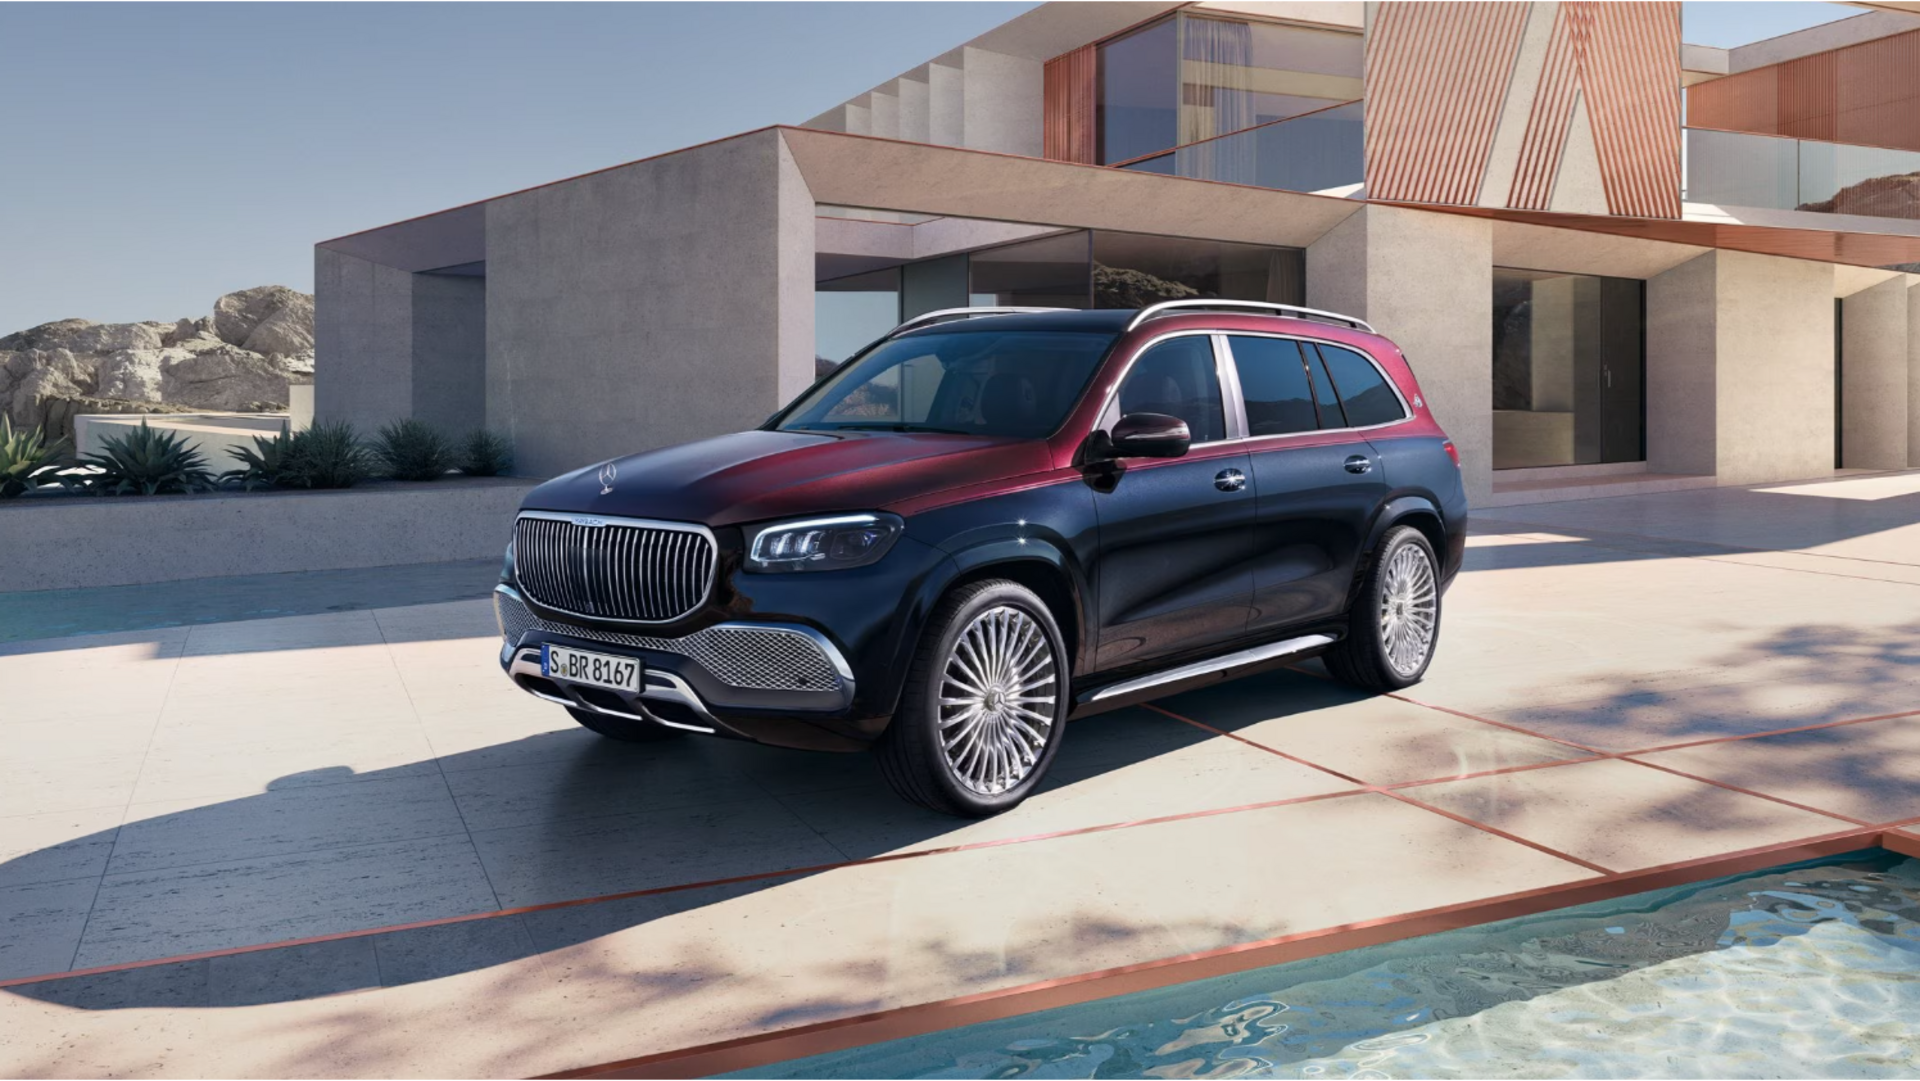 Mercedes-Maybach GLS gains popularity with Bollywood celebrities: Check best features